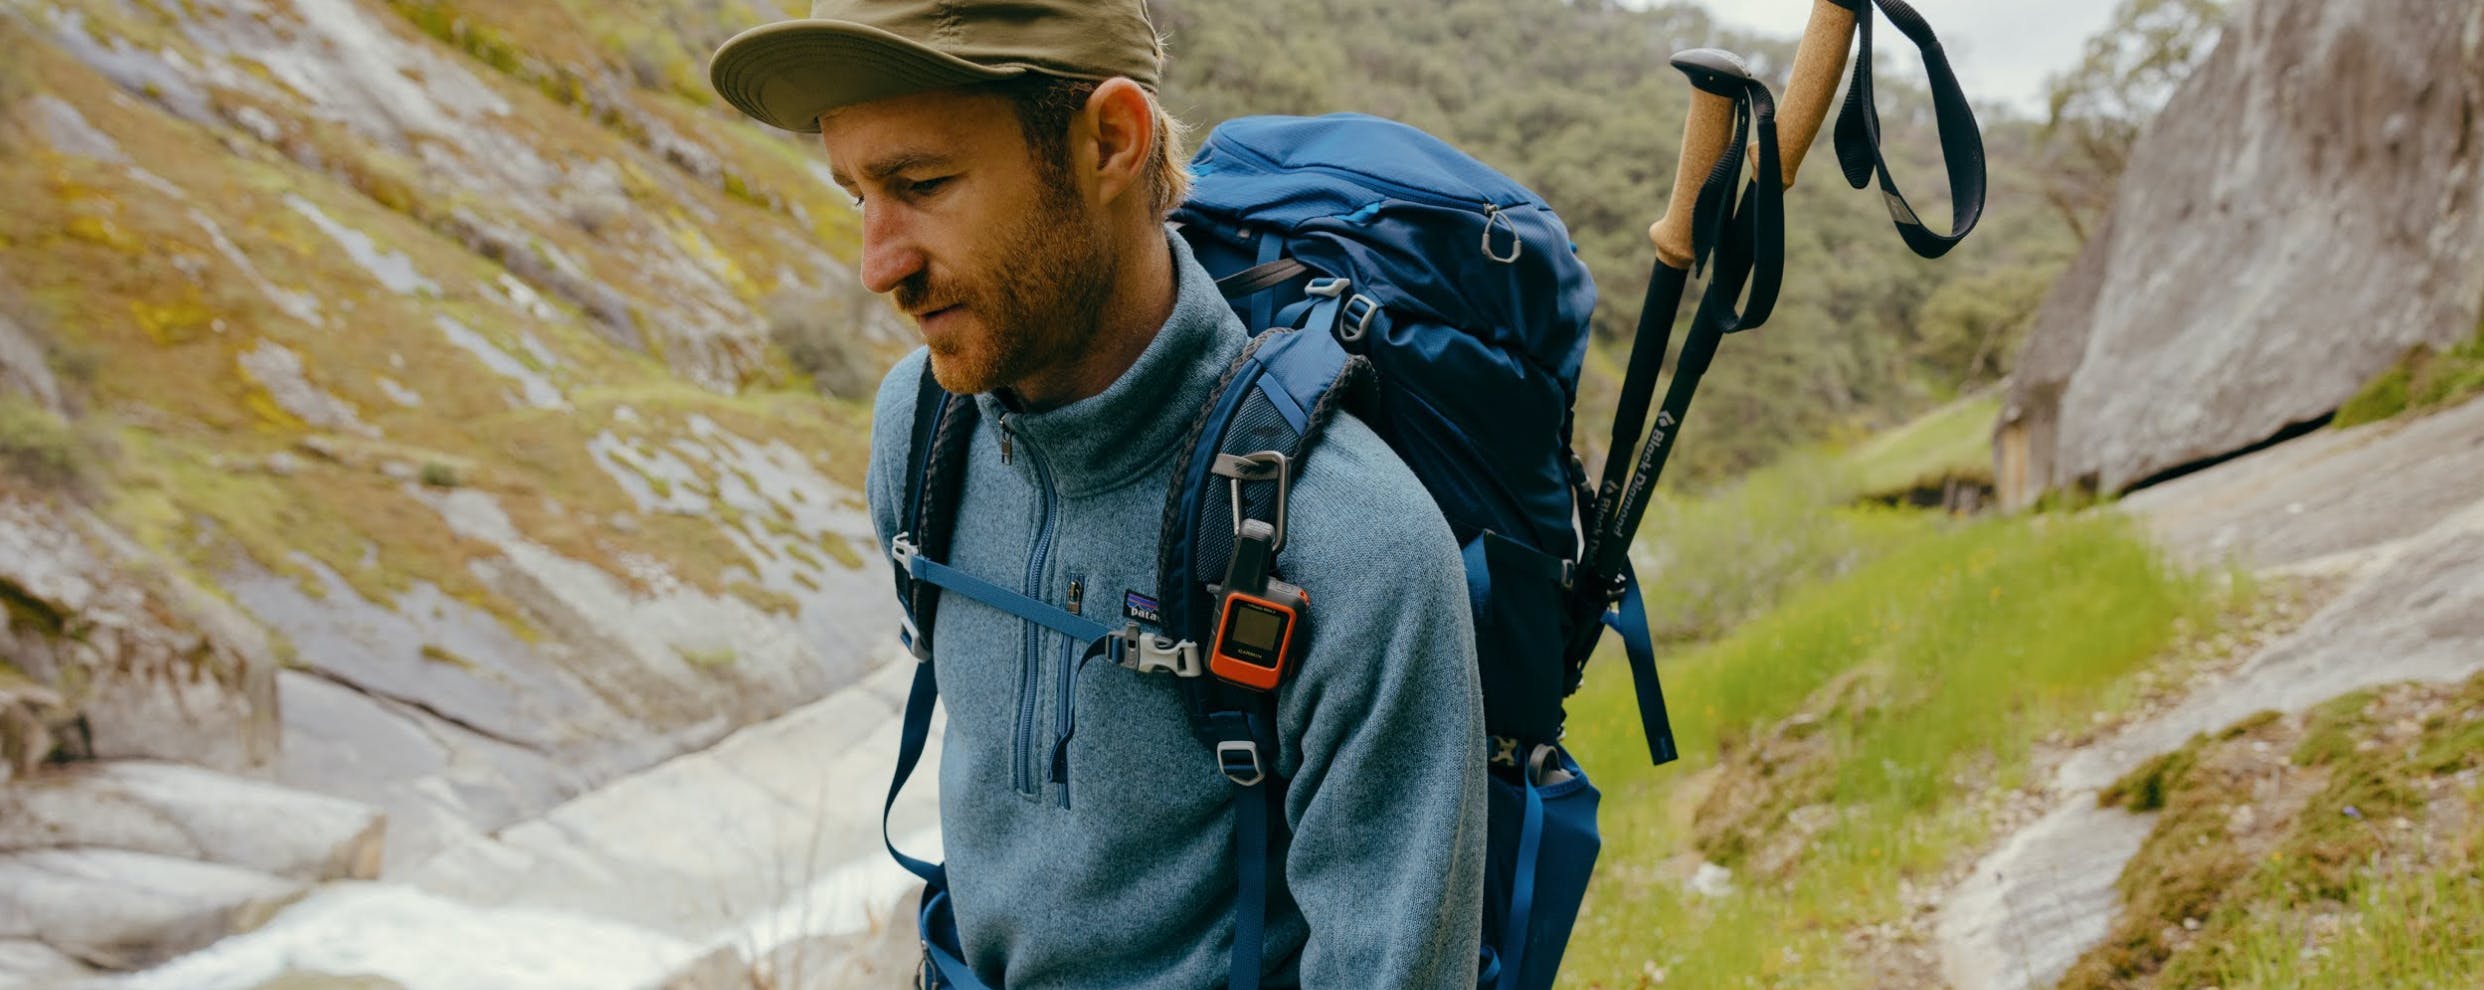 Scope out new layers, footwear and gear for early starts, bright days and fresh routines.